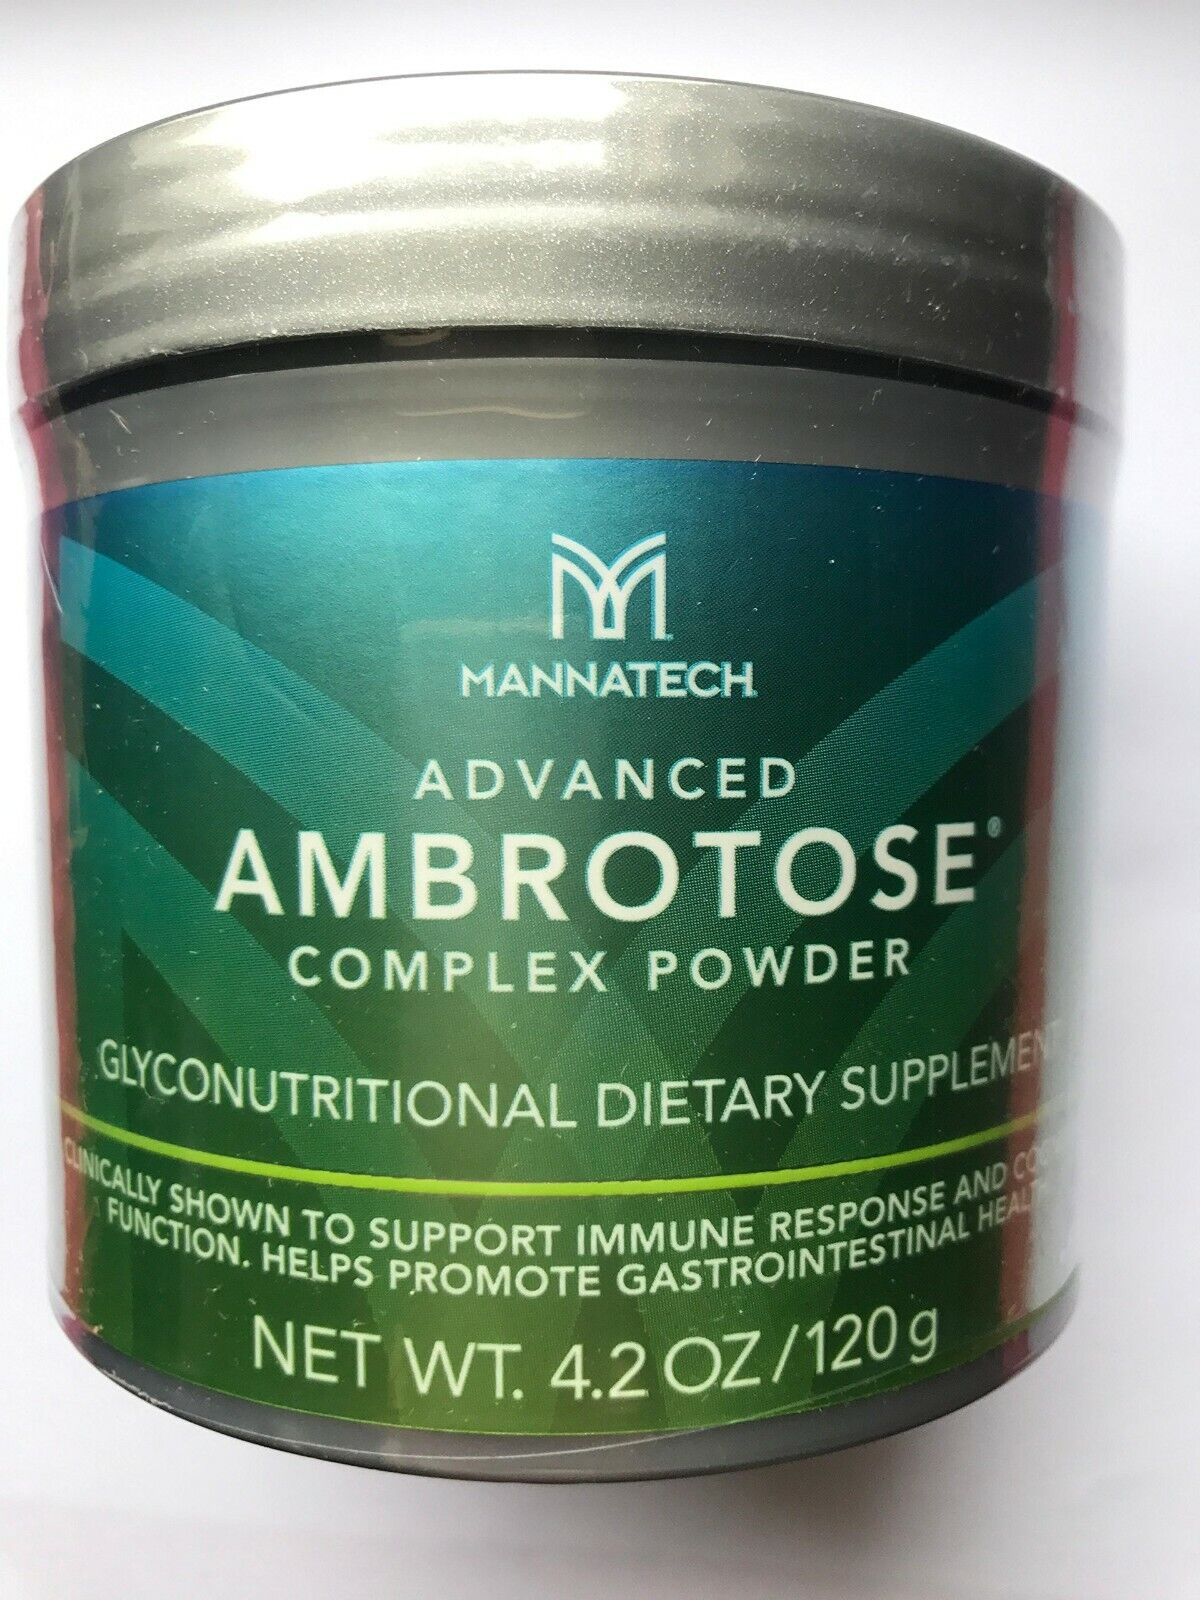 2 Canisters Mannatech Advanced Ambrotose Complex 120g Powder Immune Boost NEW